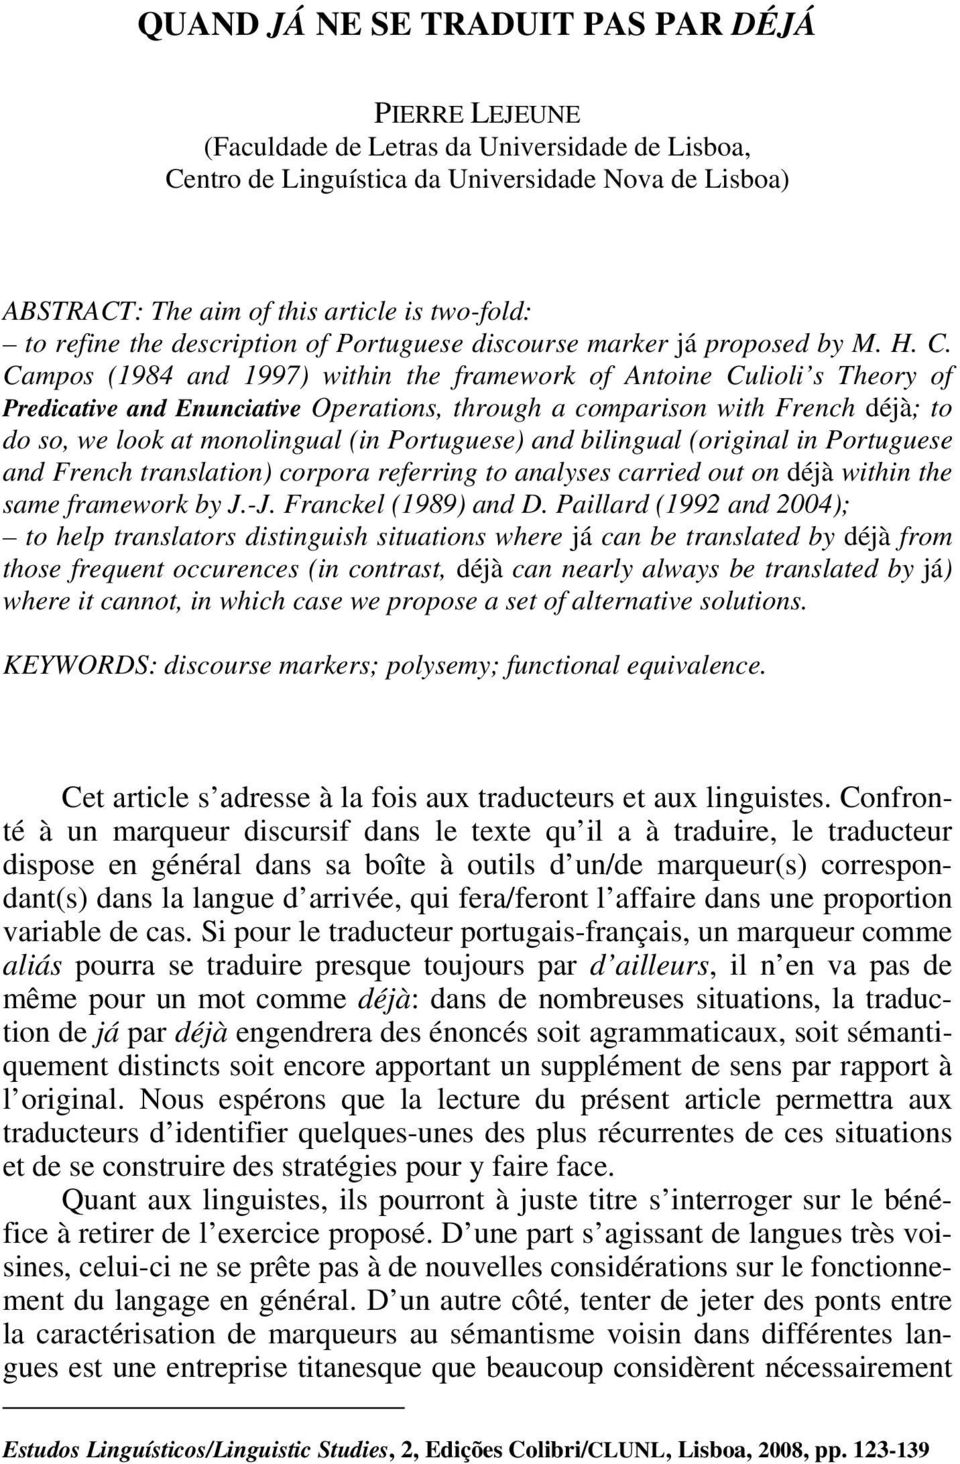 Campos (1984 and 1997) within the framework of Antoine Culioli s Theory of Predicative and Enunciative Operations, through a comparison with French déjà; to do so, we look at monolingual (in